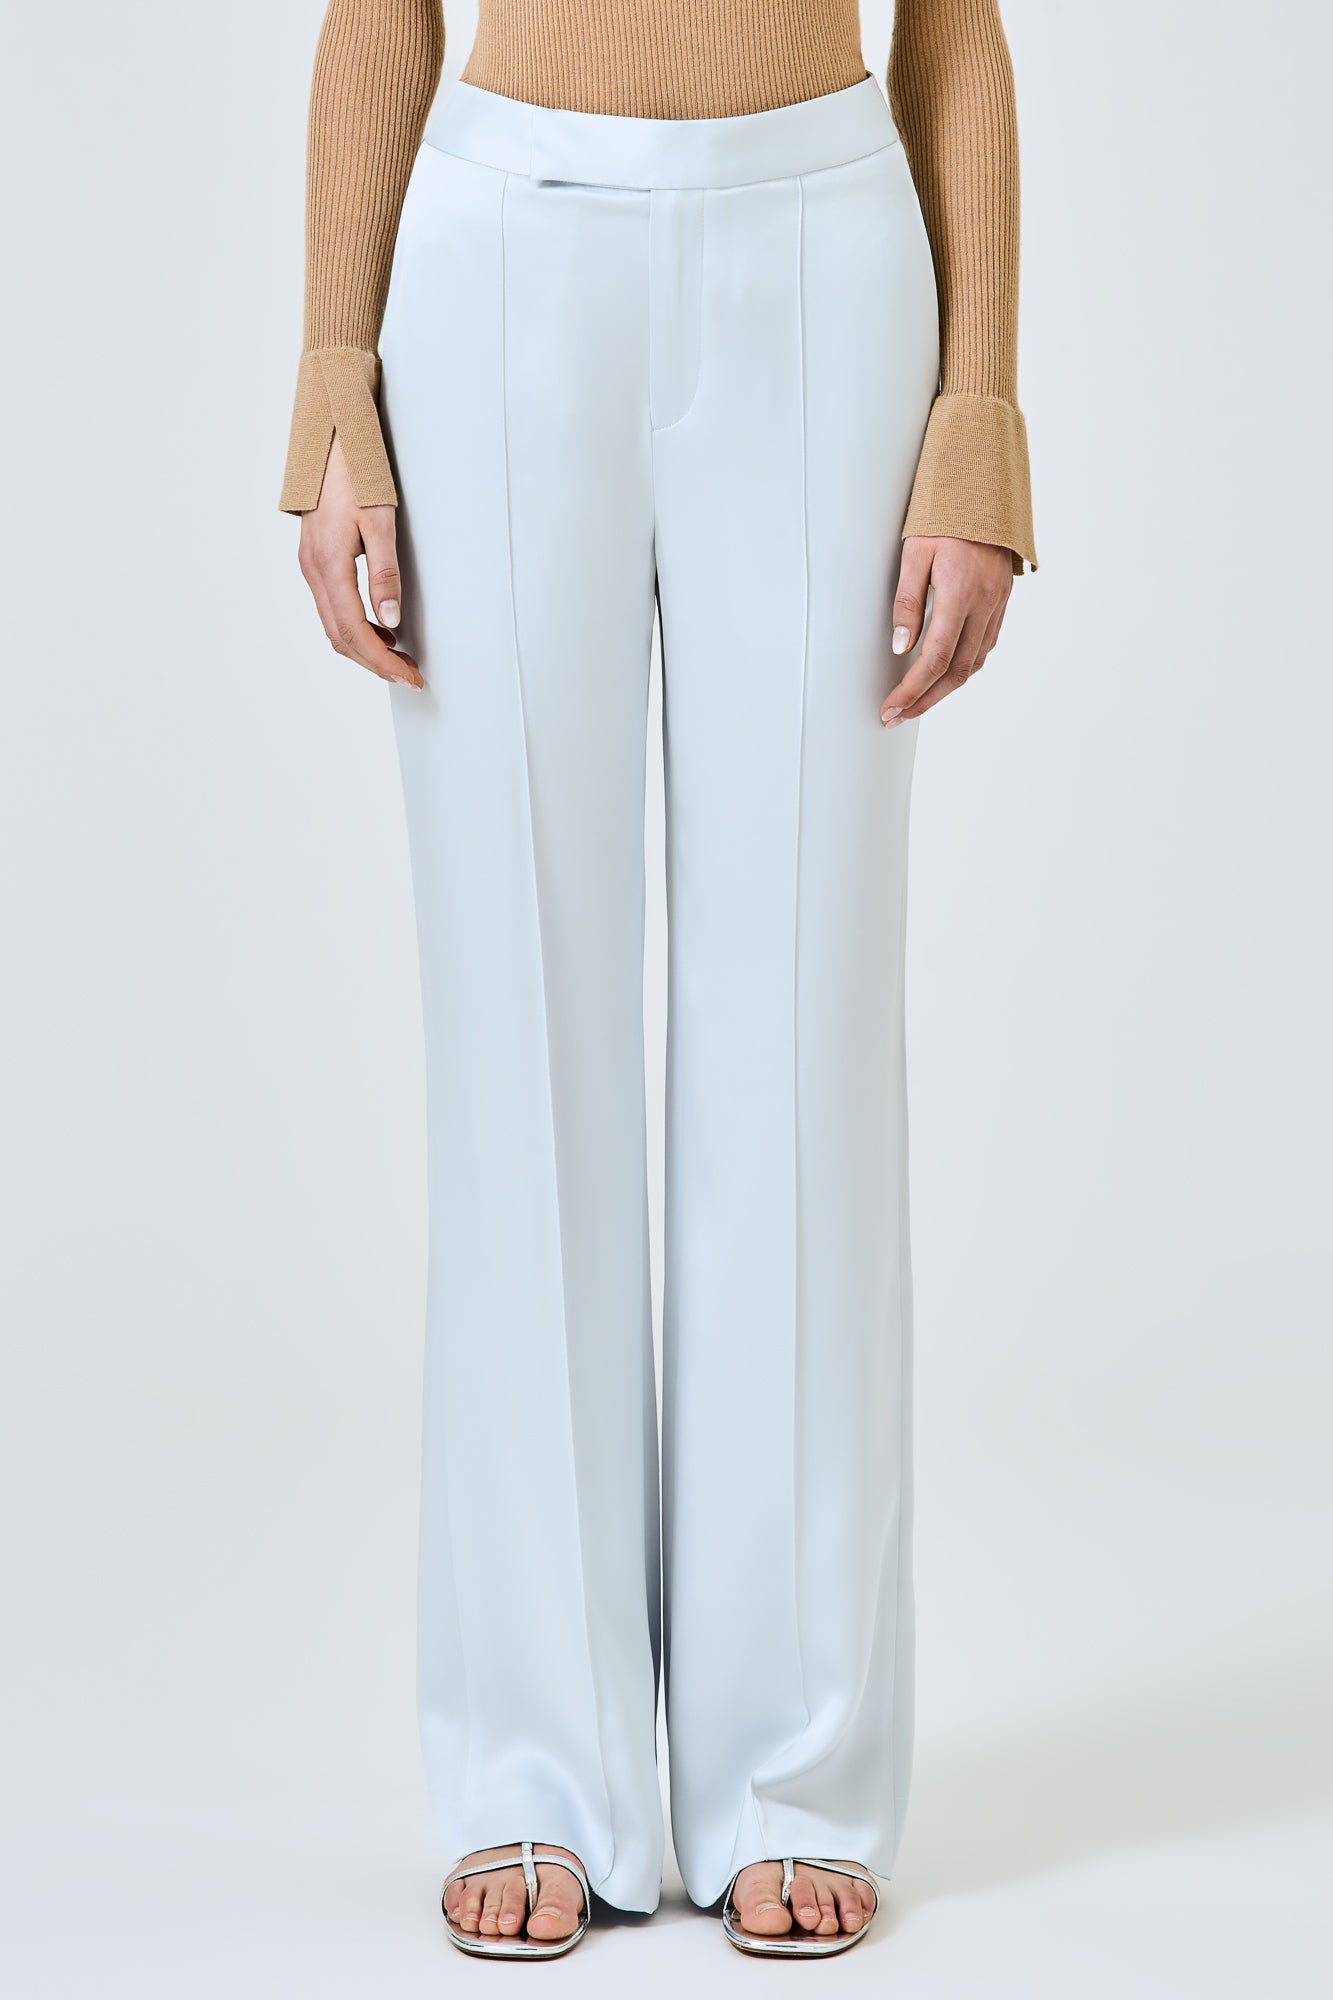 Andrea straight trousers in double satin